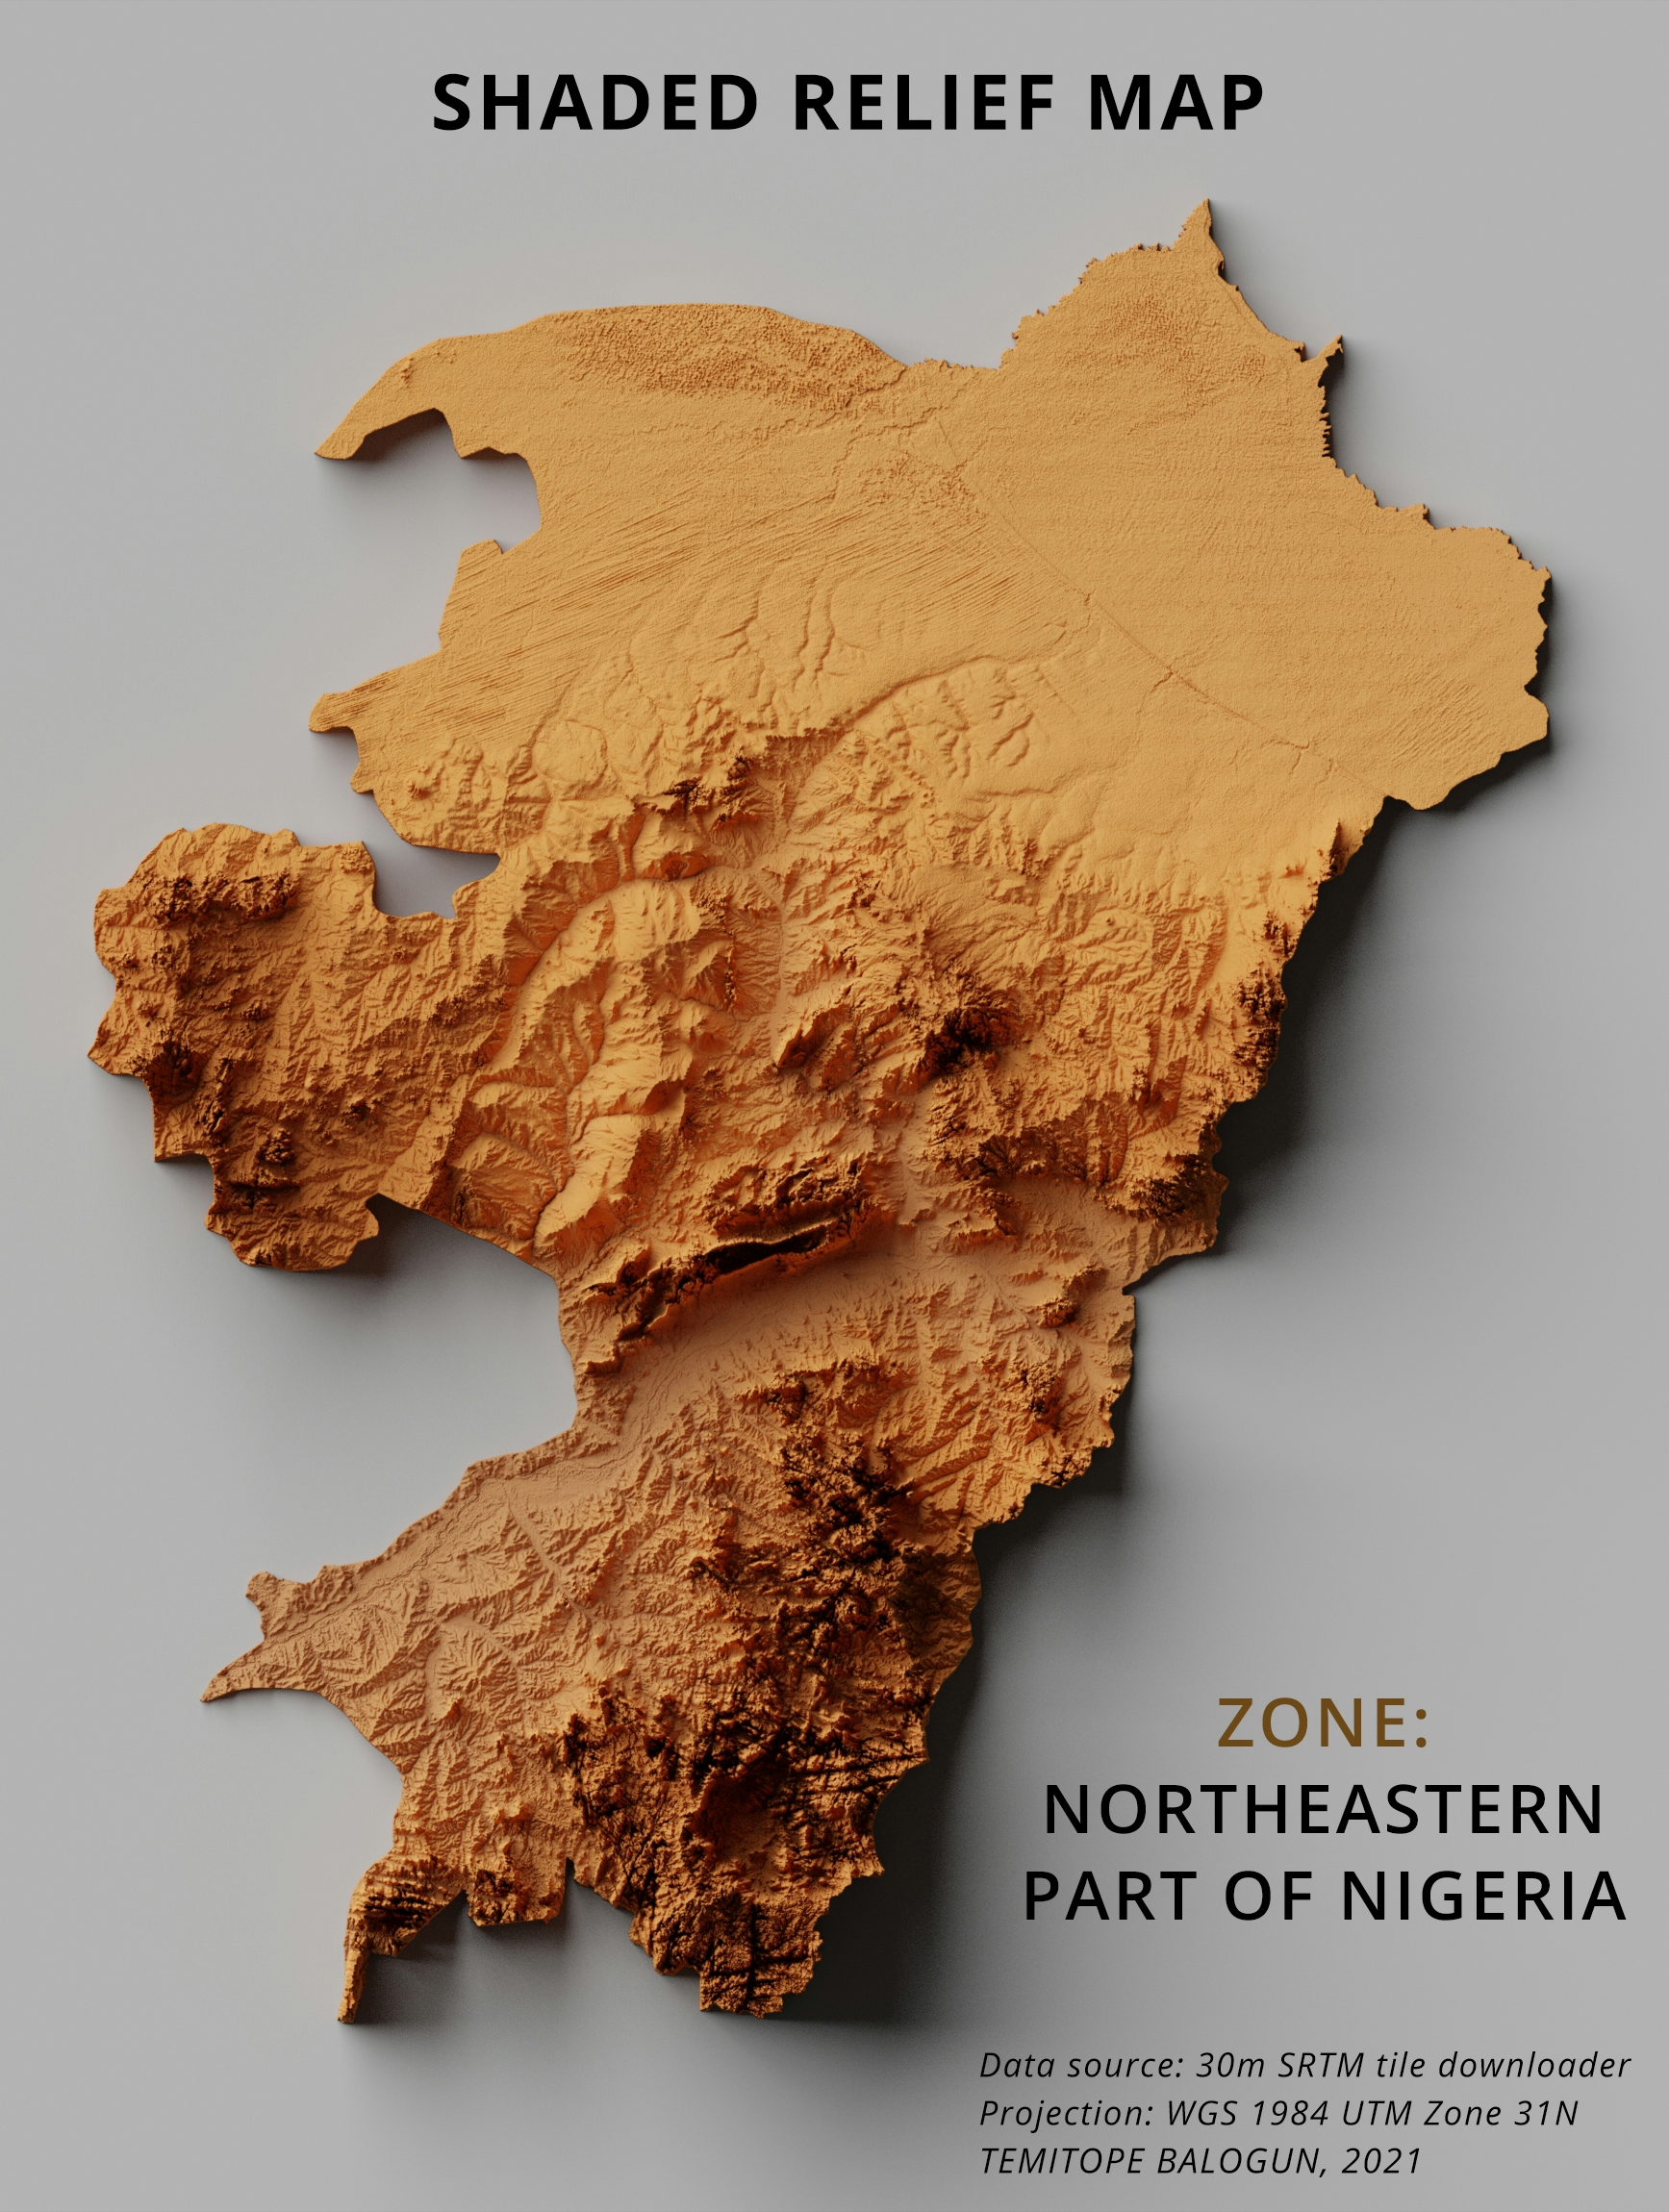 Shaded relief map of Northeastern Nigeria